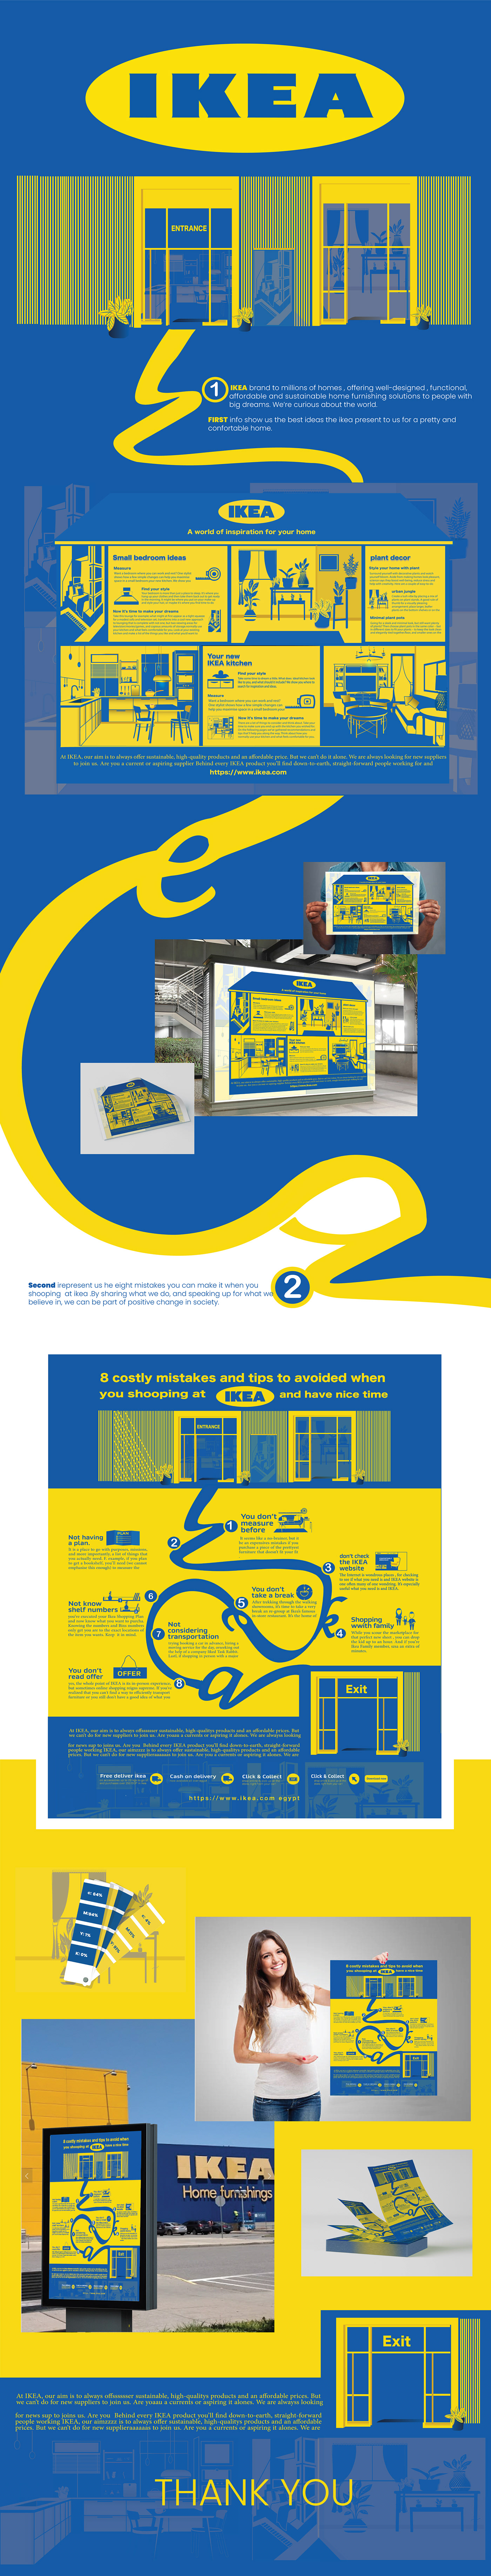 ikea infographic Layout inphograph